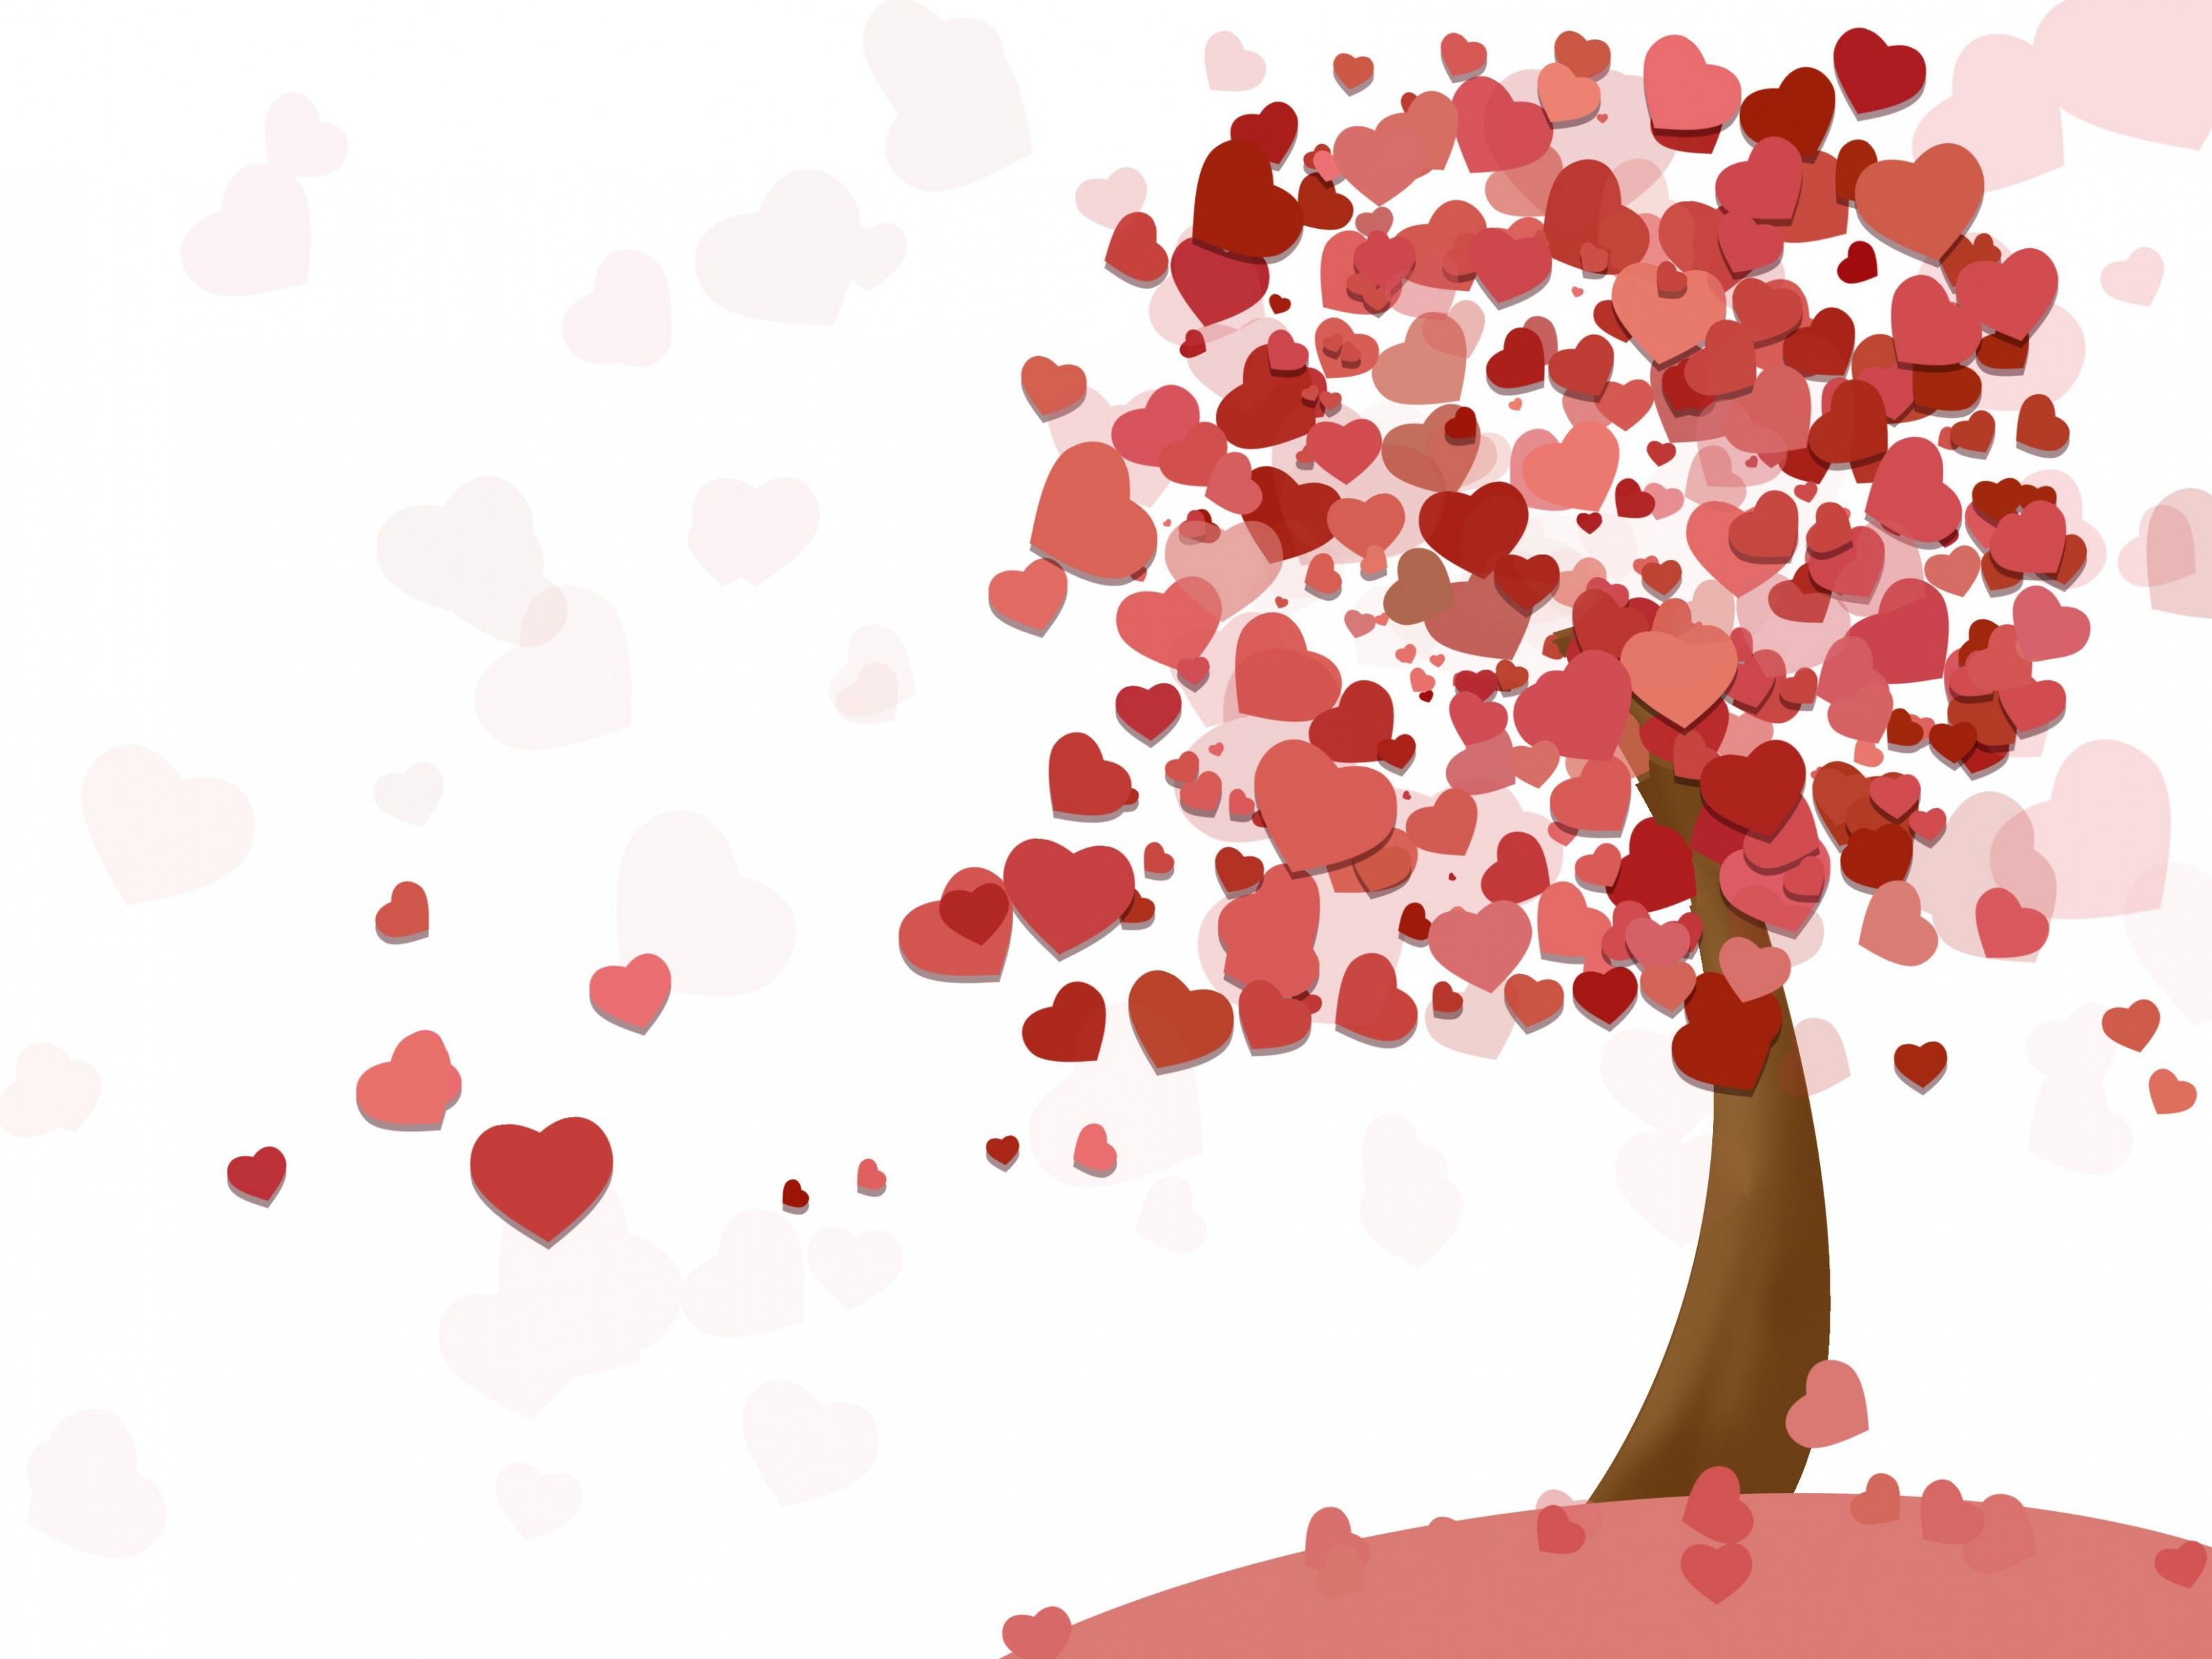 Tree of red hearts on a white background Desktop wallpaper 1152x864